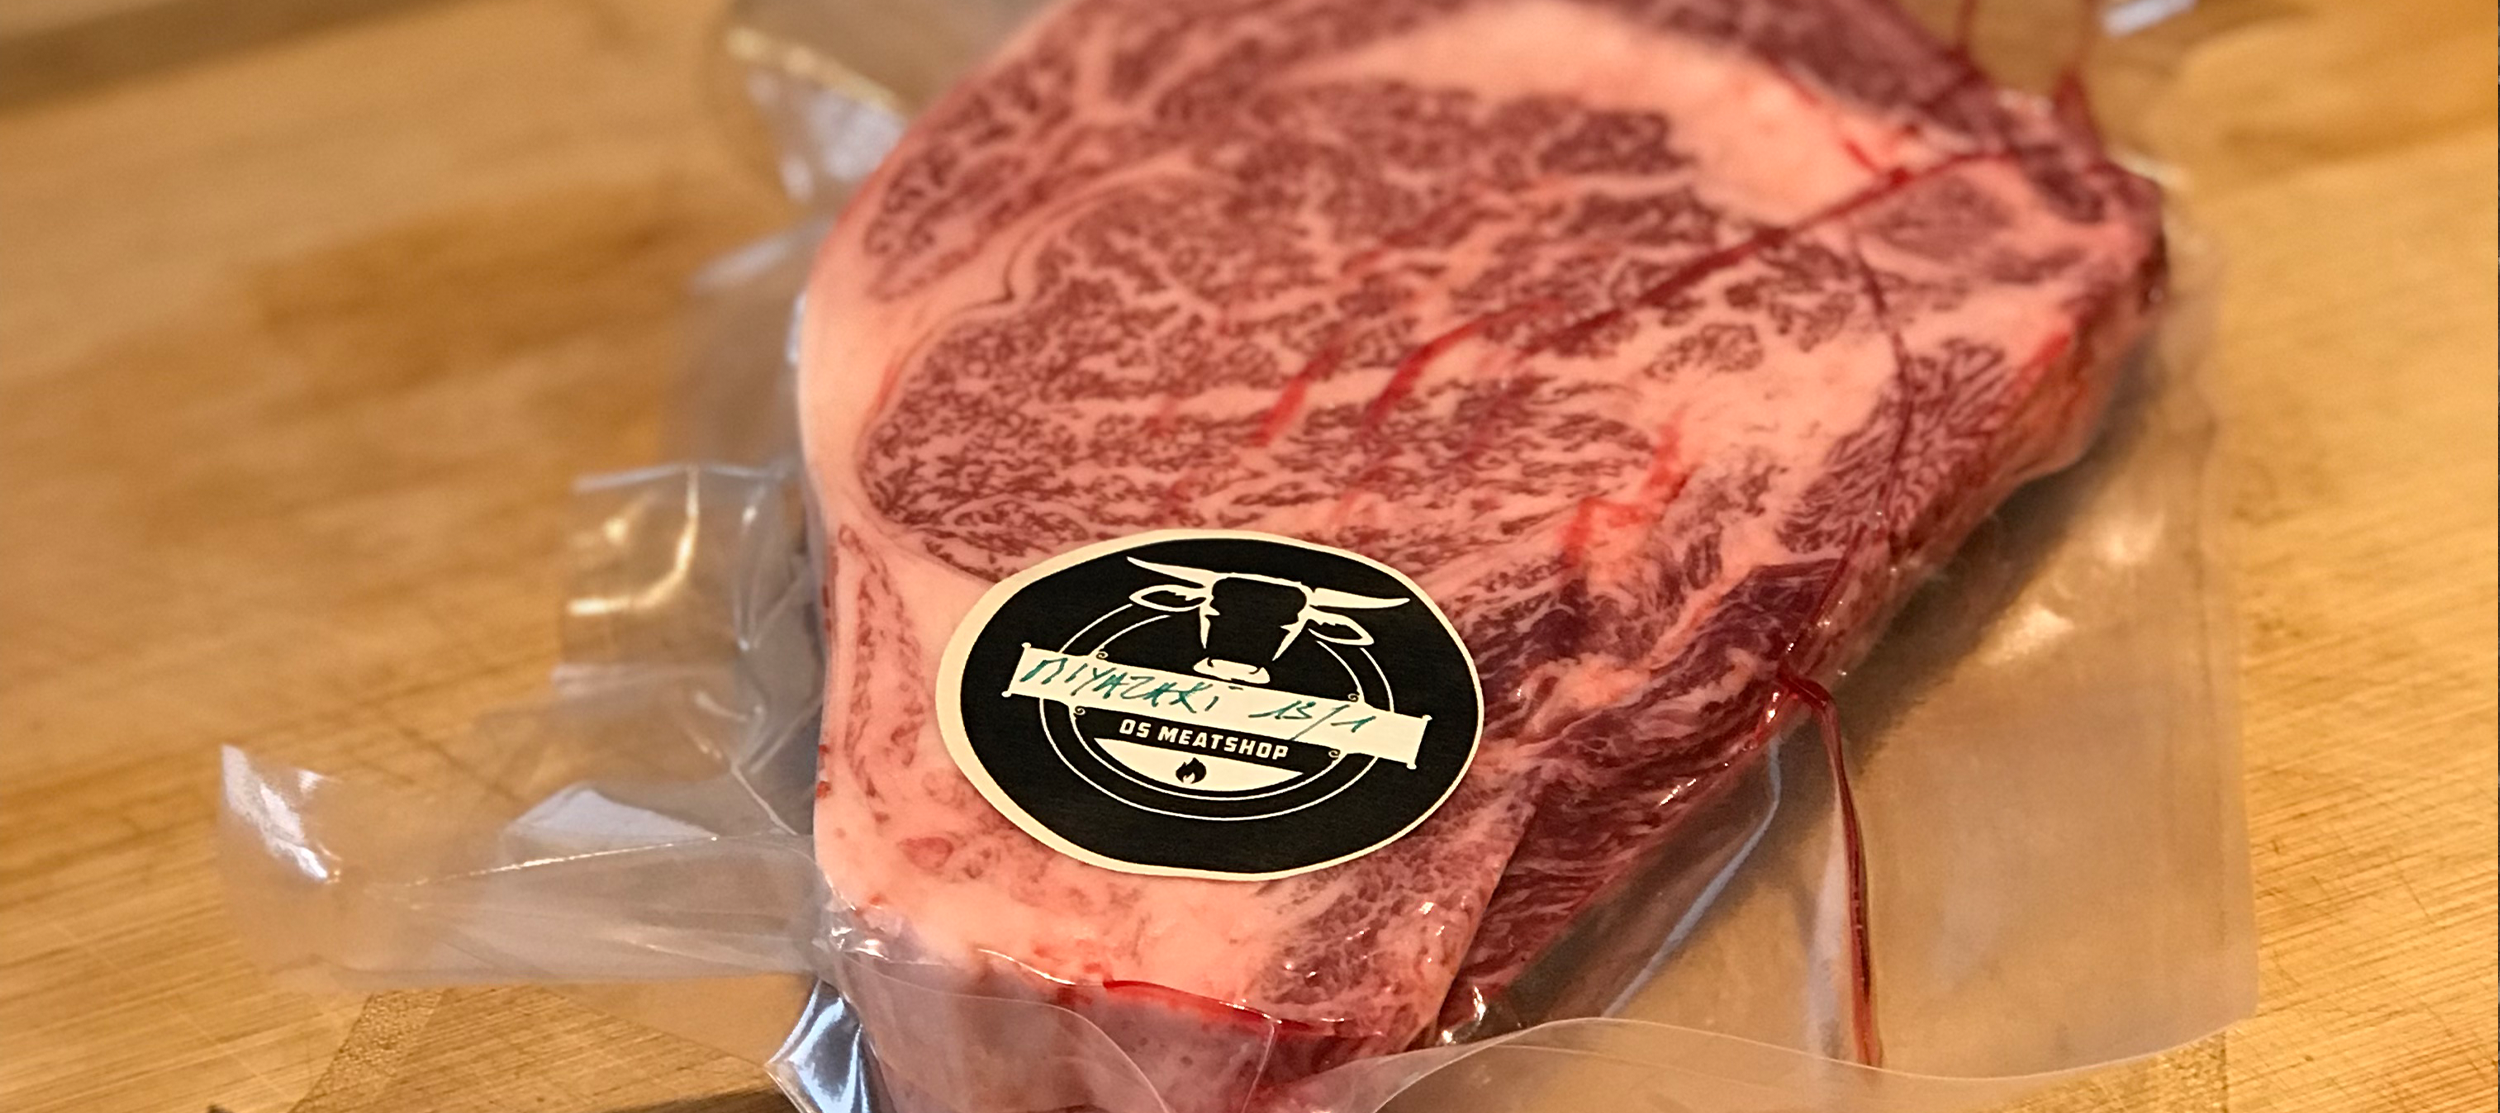 Comparing Steak Cuts: How to Choose the Japanese Wagyu Steak for